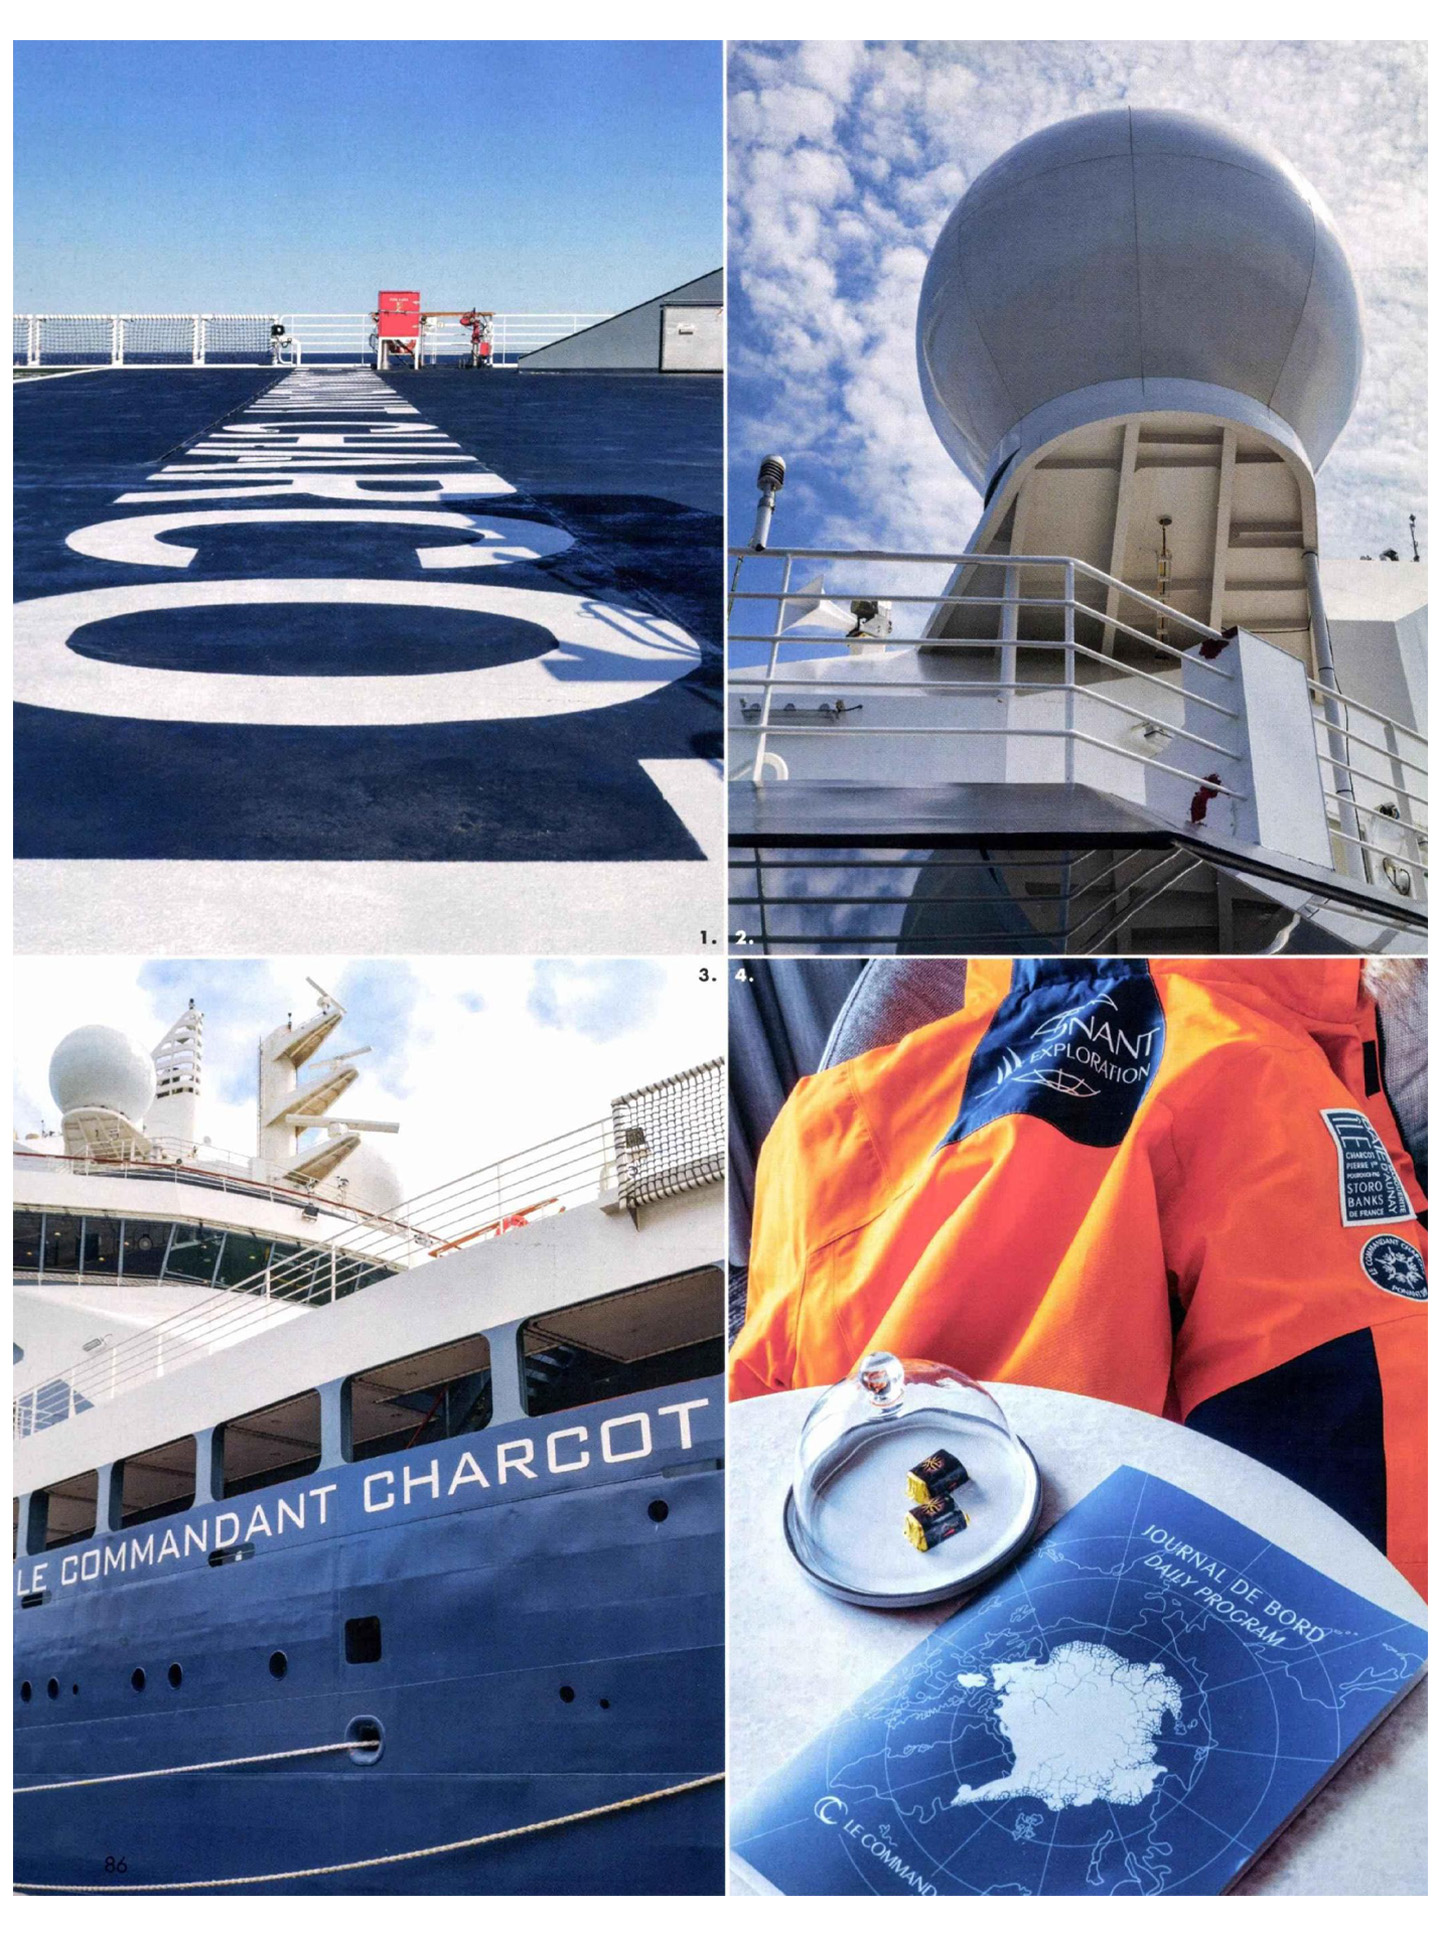 article on commander charcot of ponant in maisons côté ouest magazine, interior design by jean-philippe nuel, luxury polar expedition ship, cruise, luxury ship, interior design